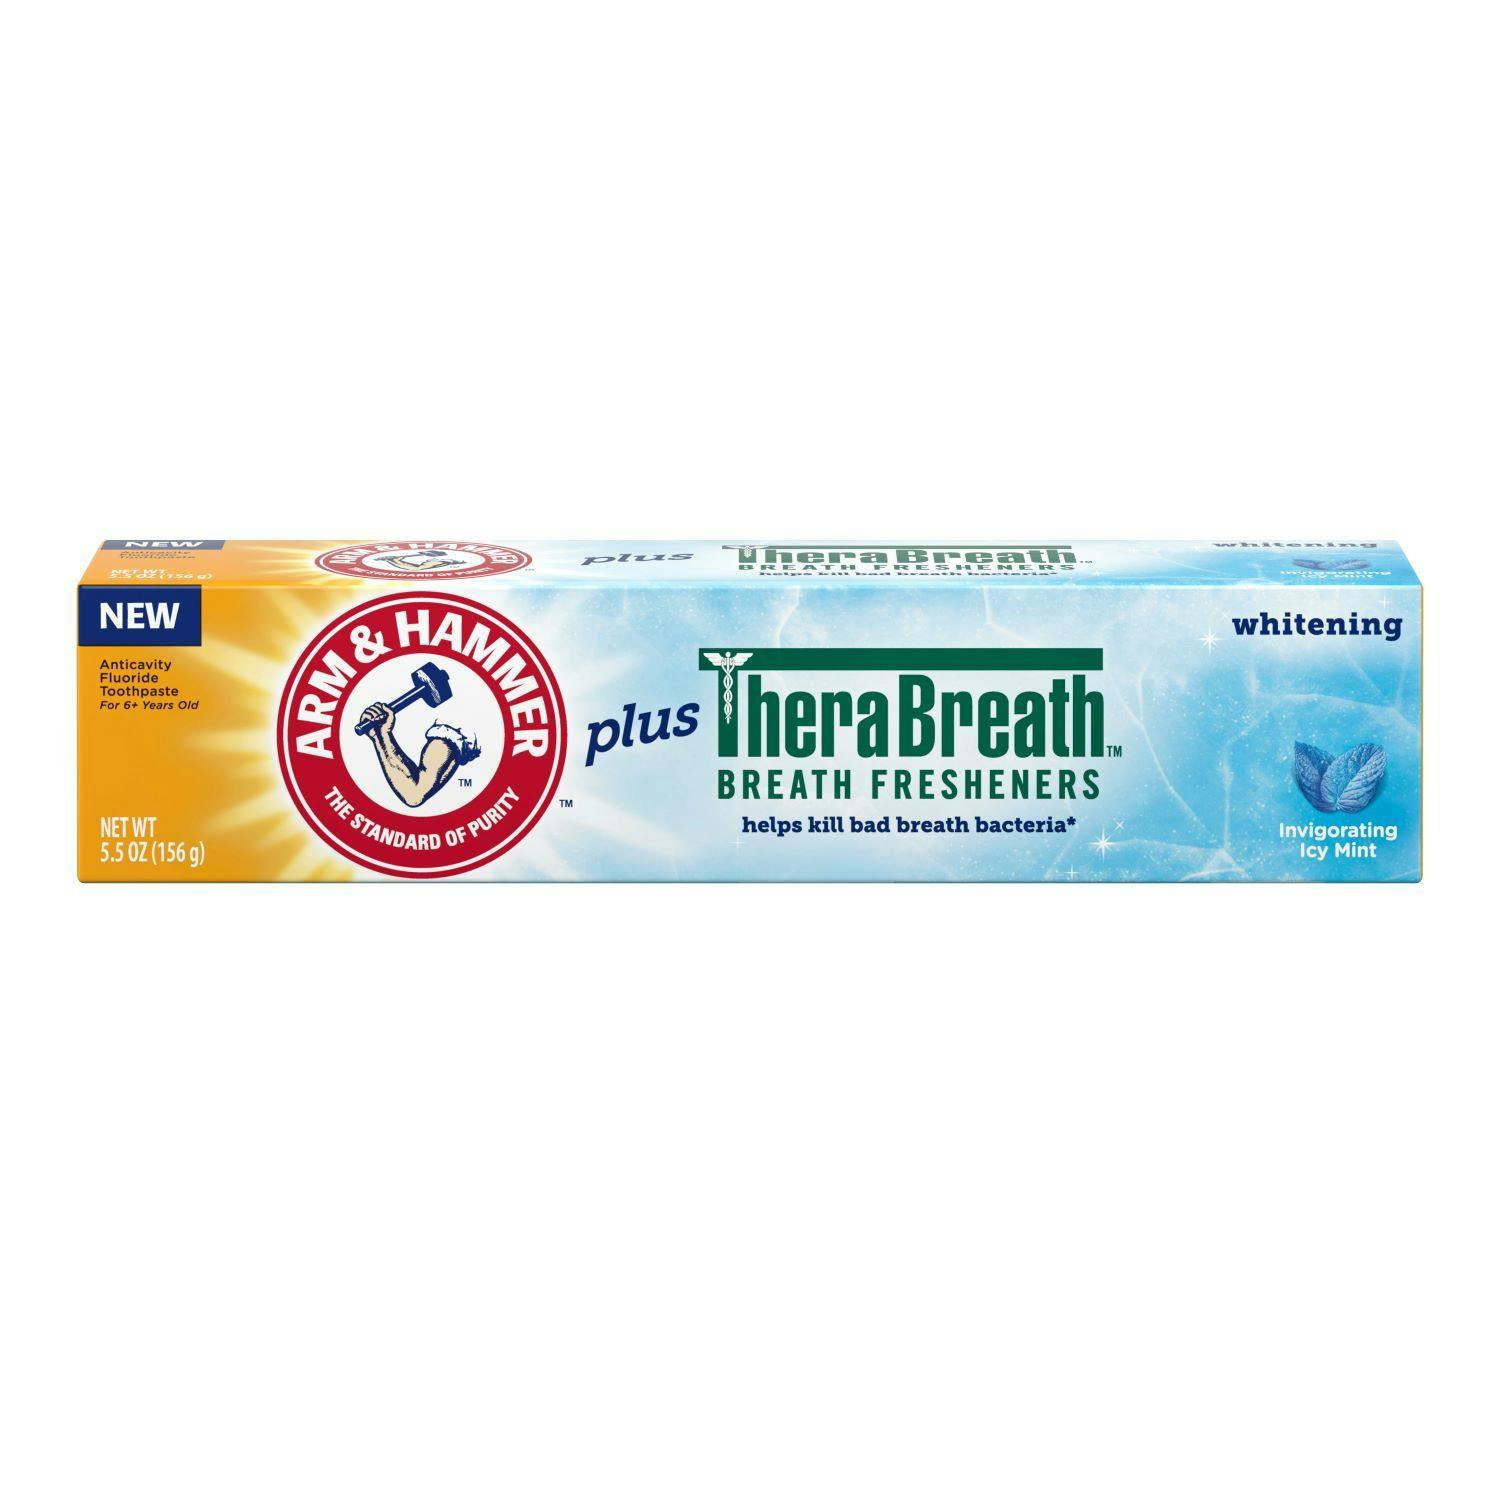 ARM & HAMMER Plus TheraBreath Toothpaste  | Image Credit: © ARM & HAMMER